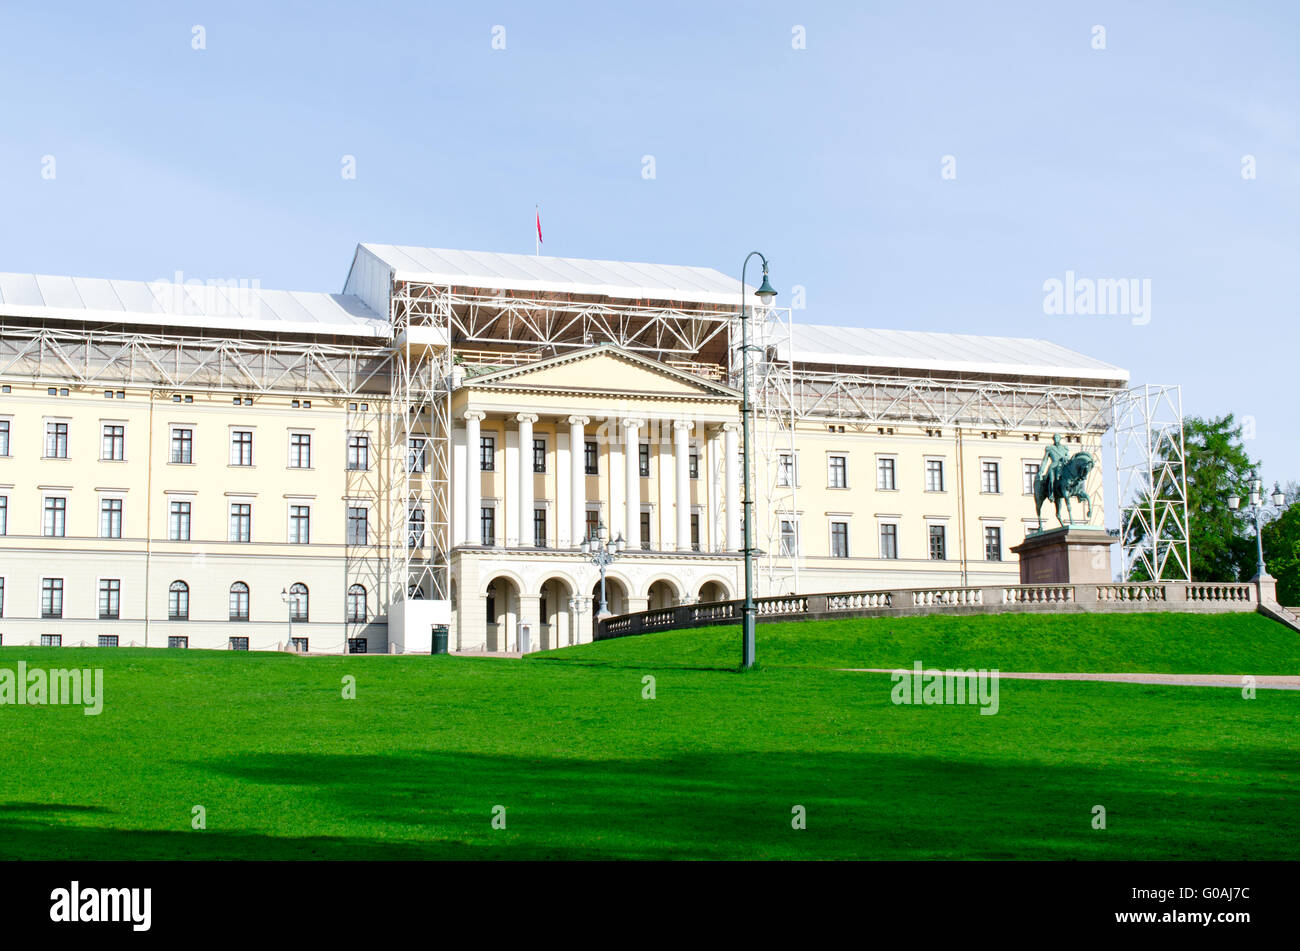 Royal Palace under construction in Oslo Norway Stock Photo